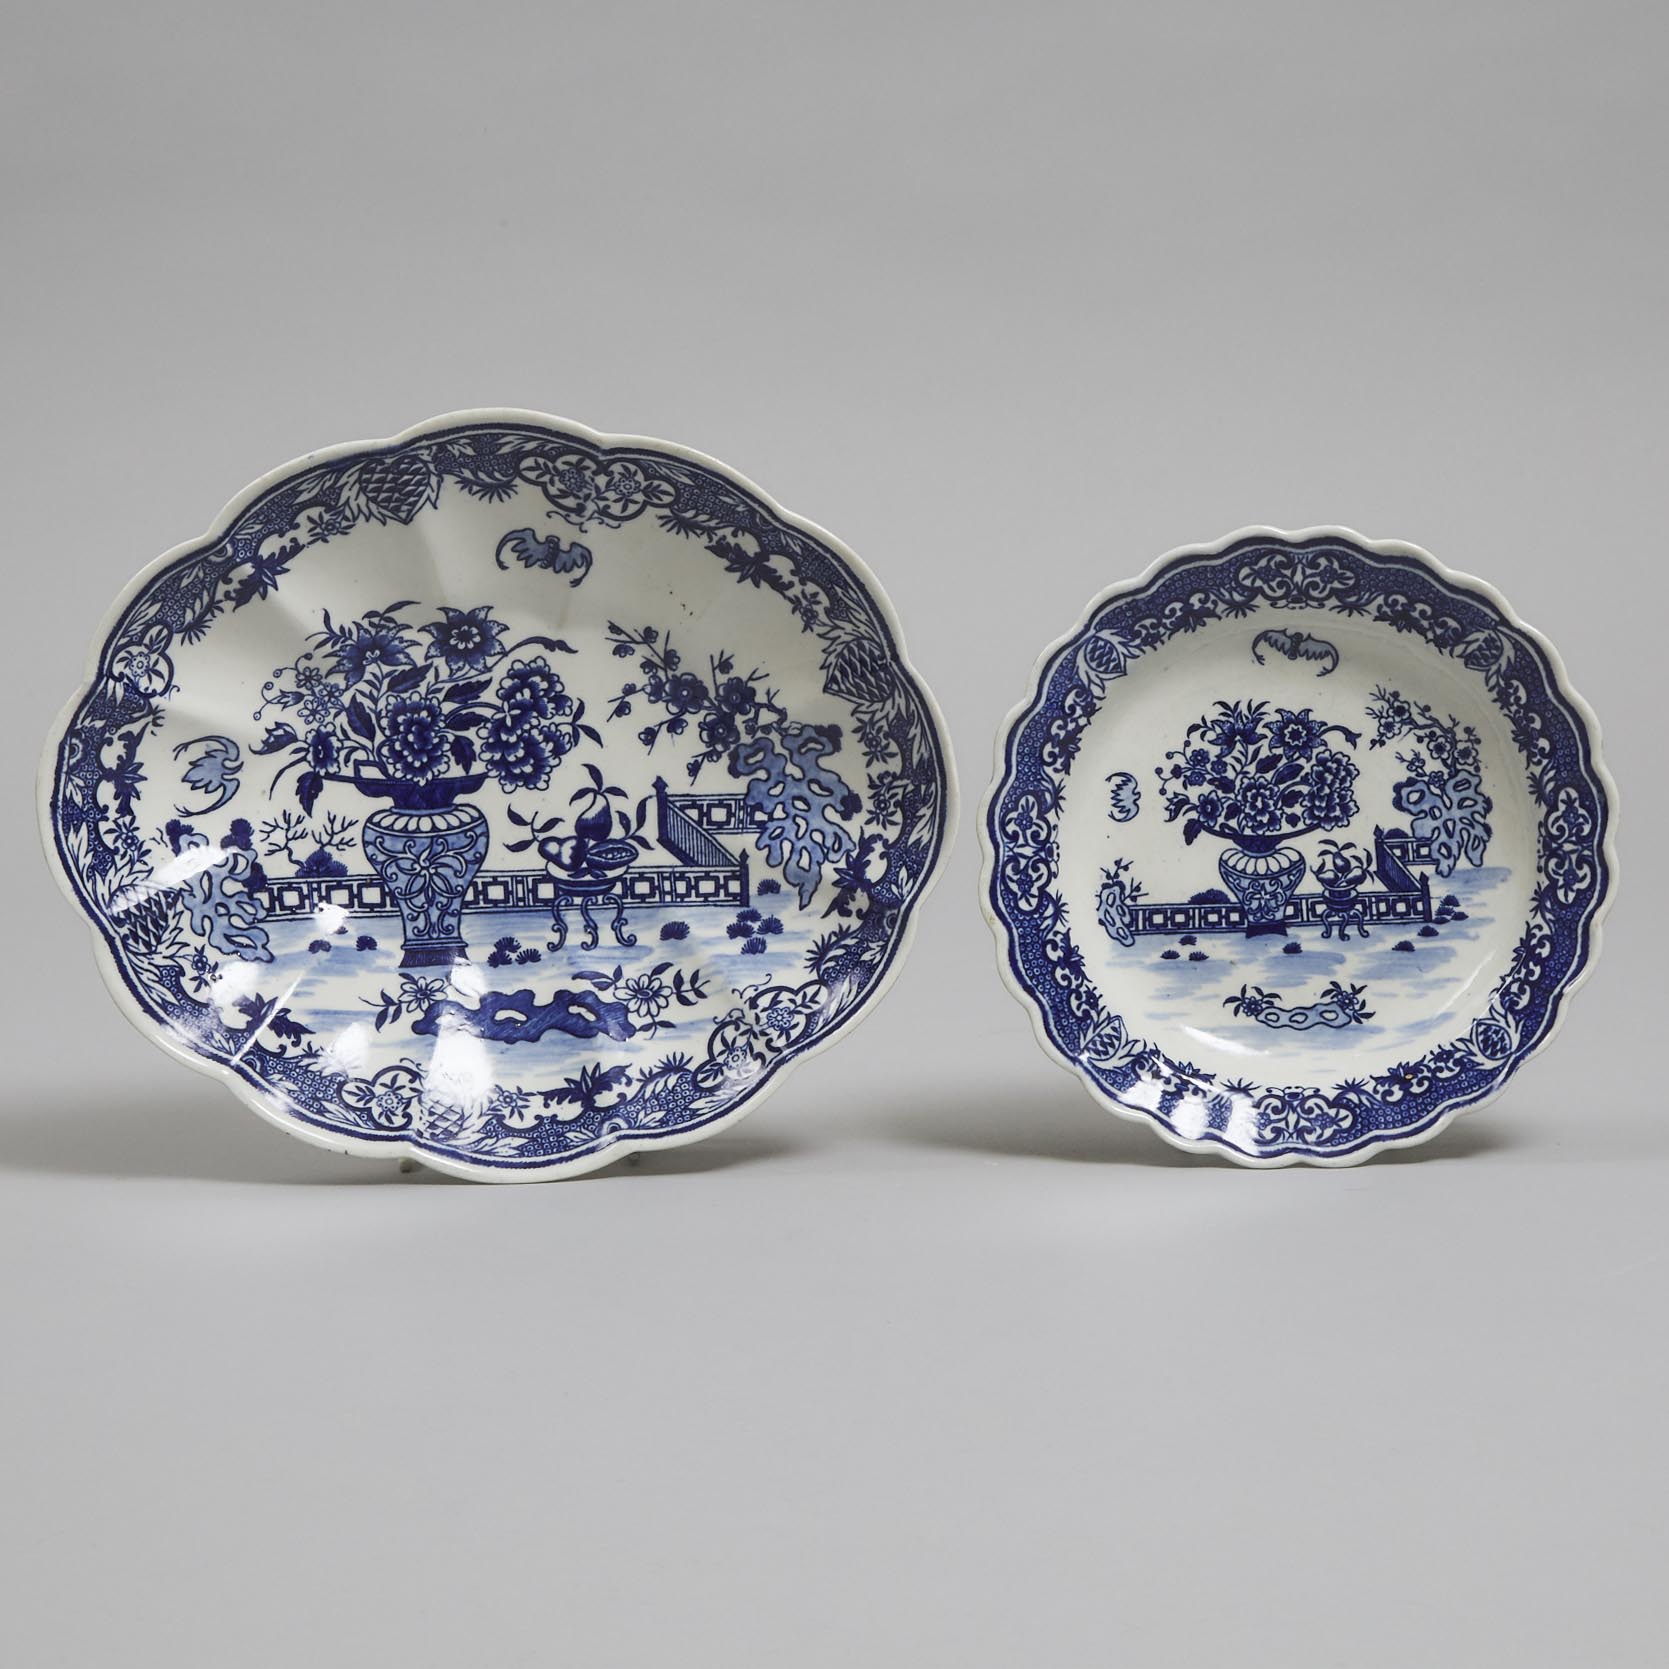 Worcester Blue Printed 'Bat' Pattern Oval Dish and a Plate, c.1785